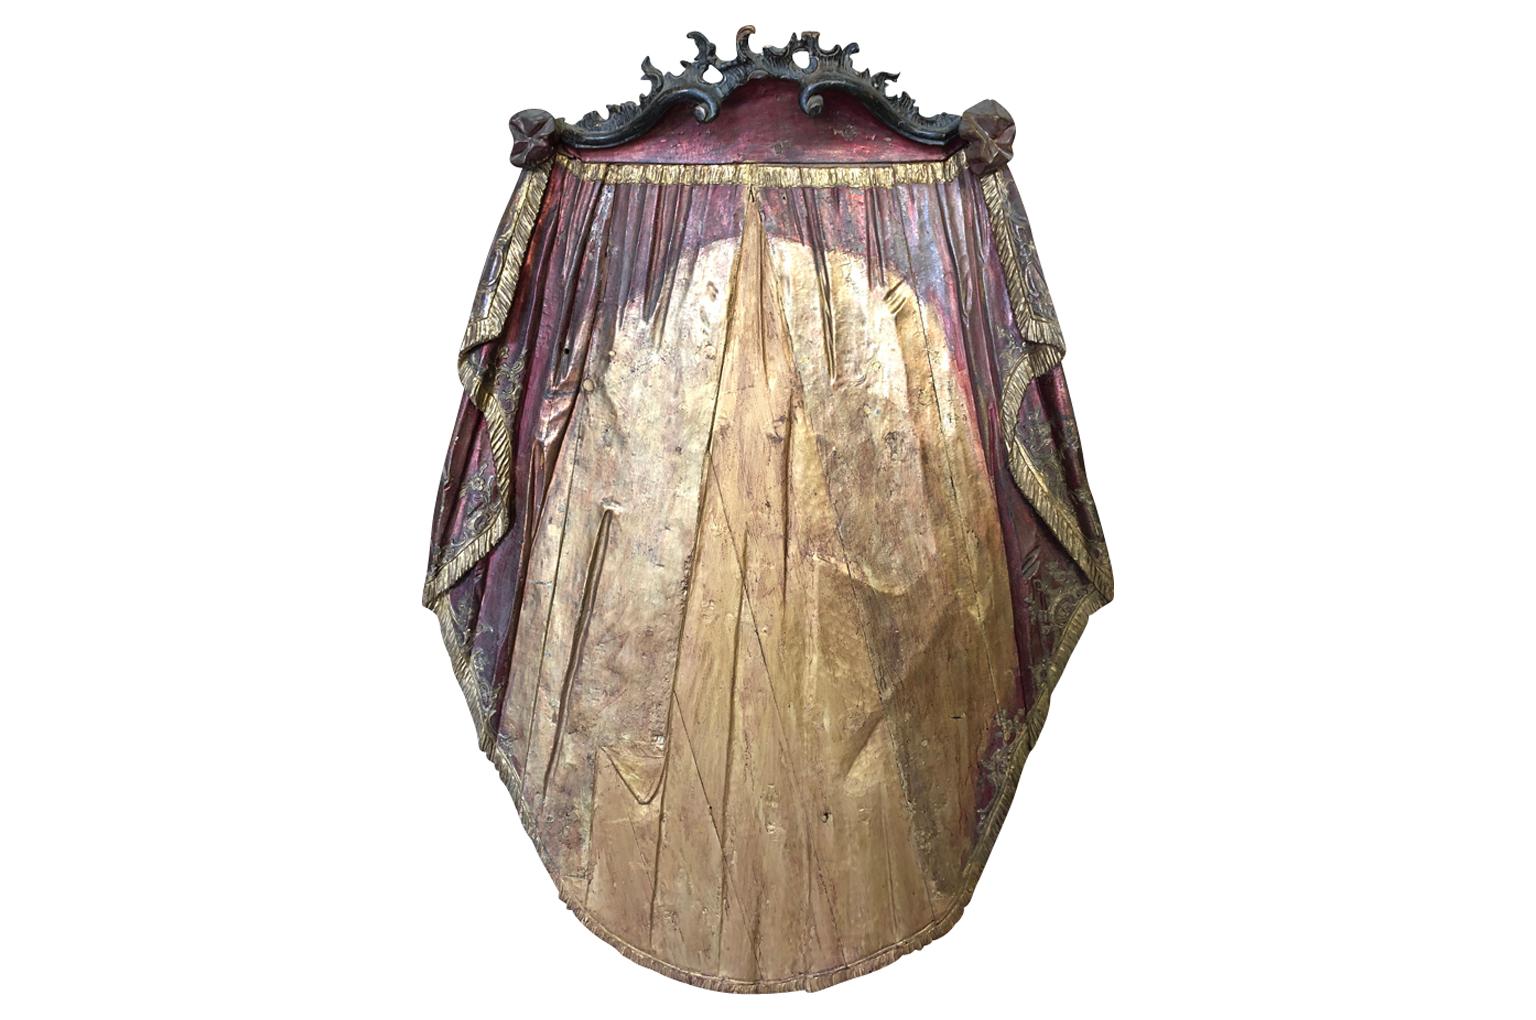 An exceptional and outstanding 18th century Venetian Baldaquin - a canopy over an altar, shrine, or throne in a church or carried in religious processions over an object of veneration - beautifully crafted from wonderfully carved gilded and